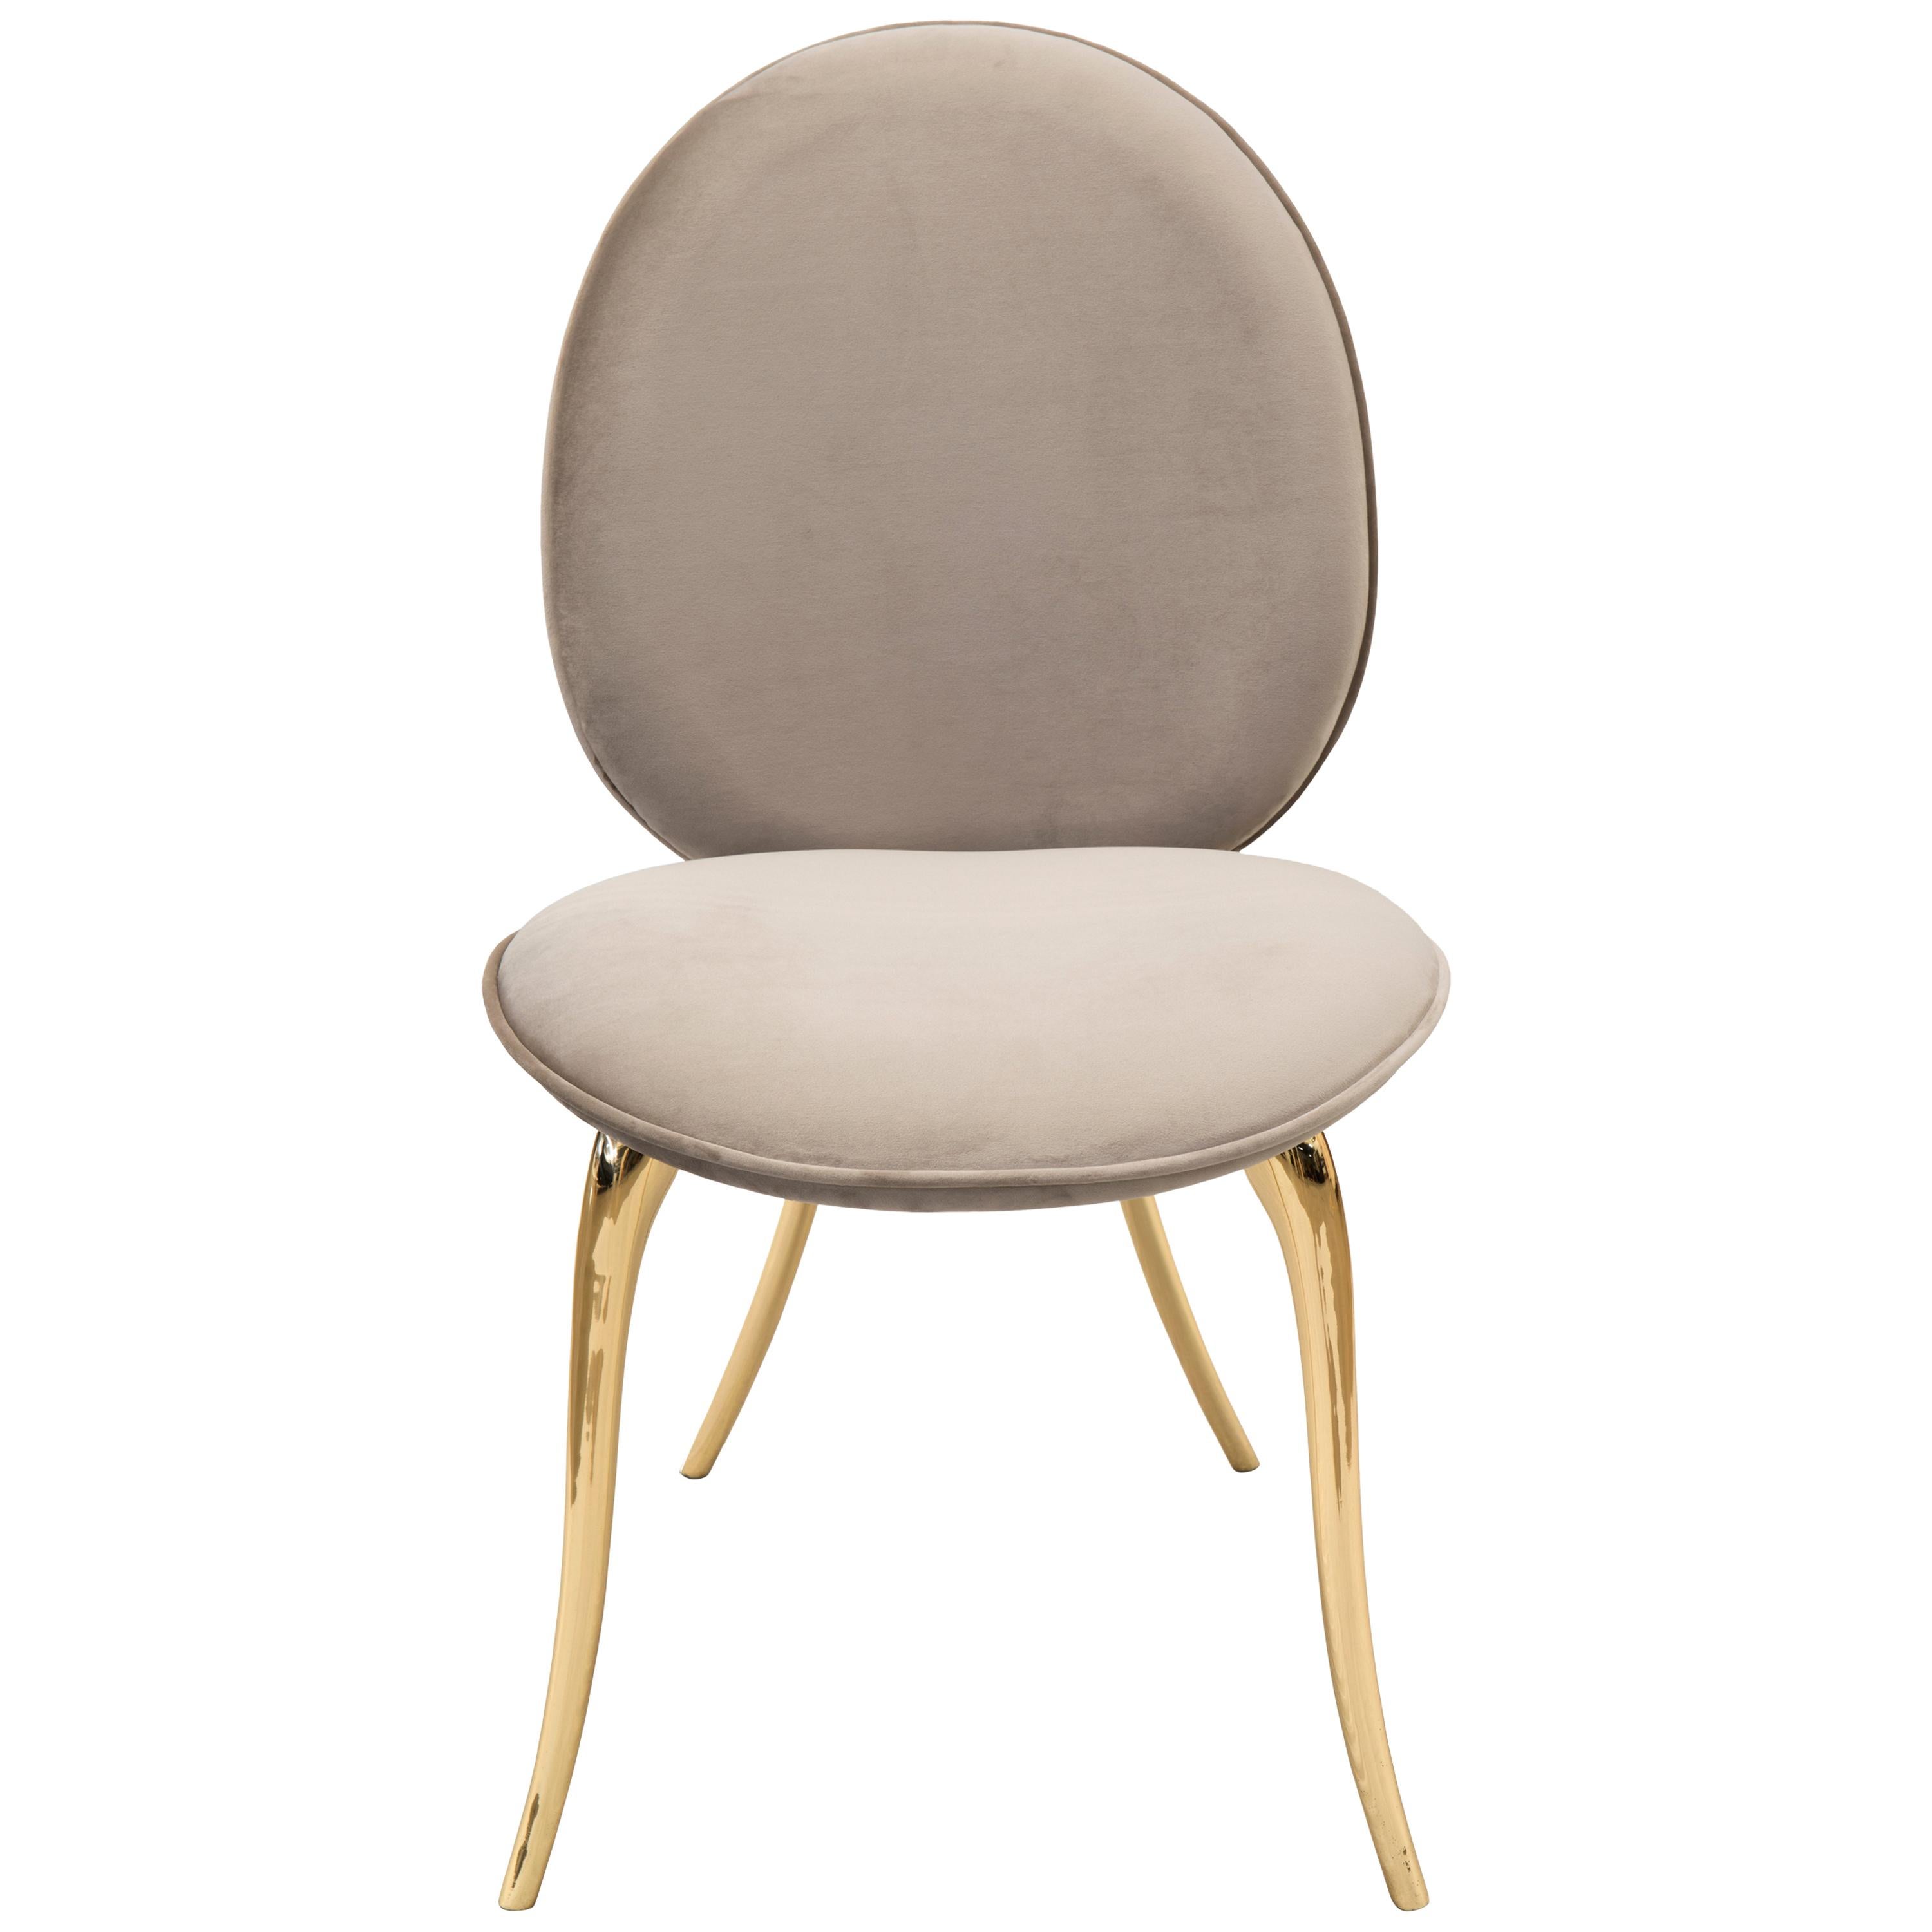 Soleil Dining Chair with Polished Casted Brass and Fabric